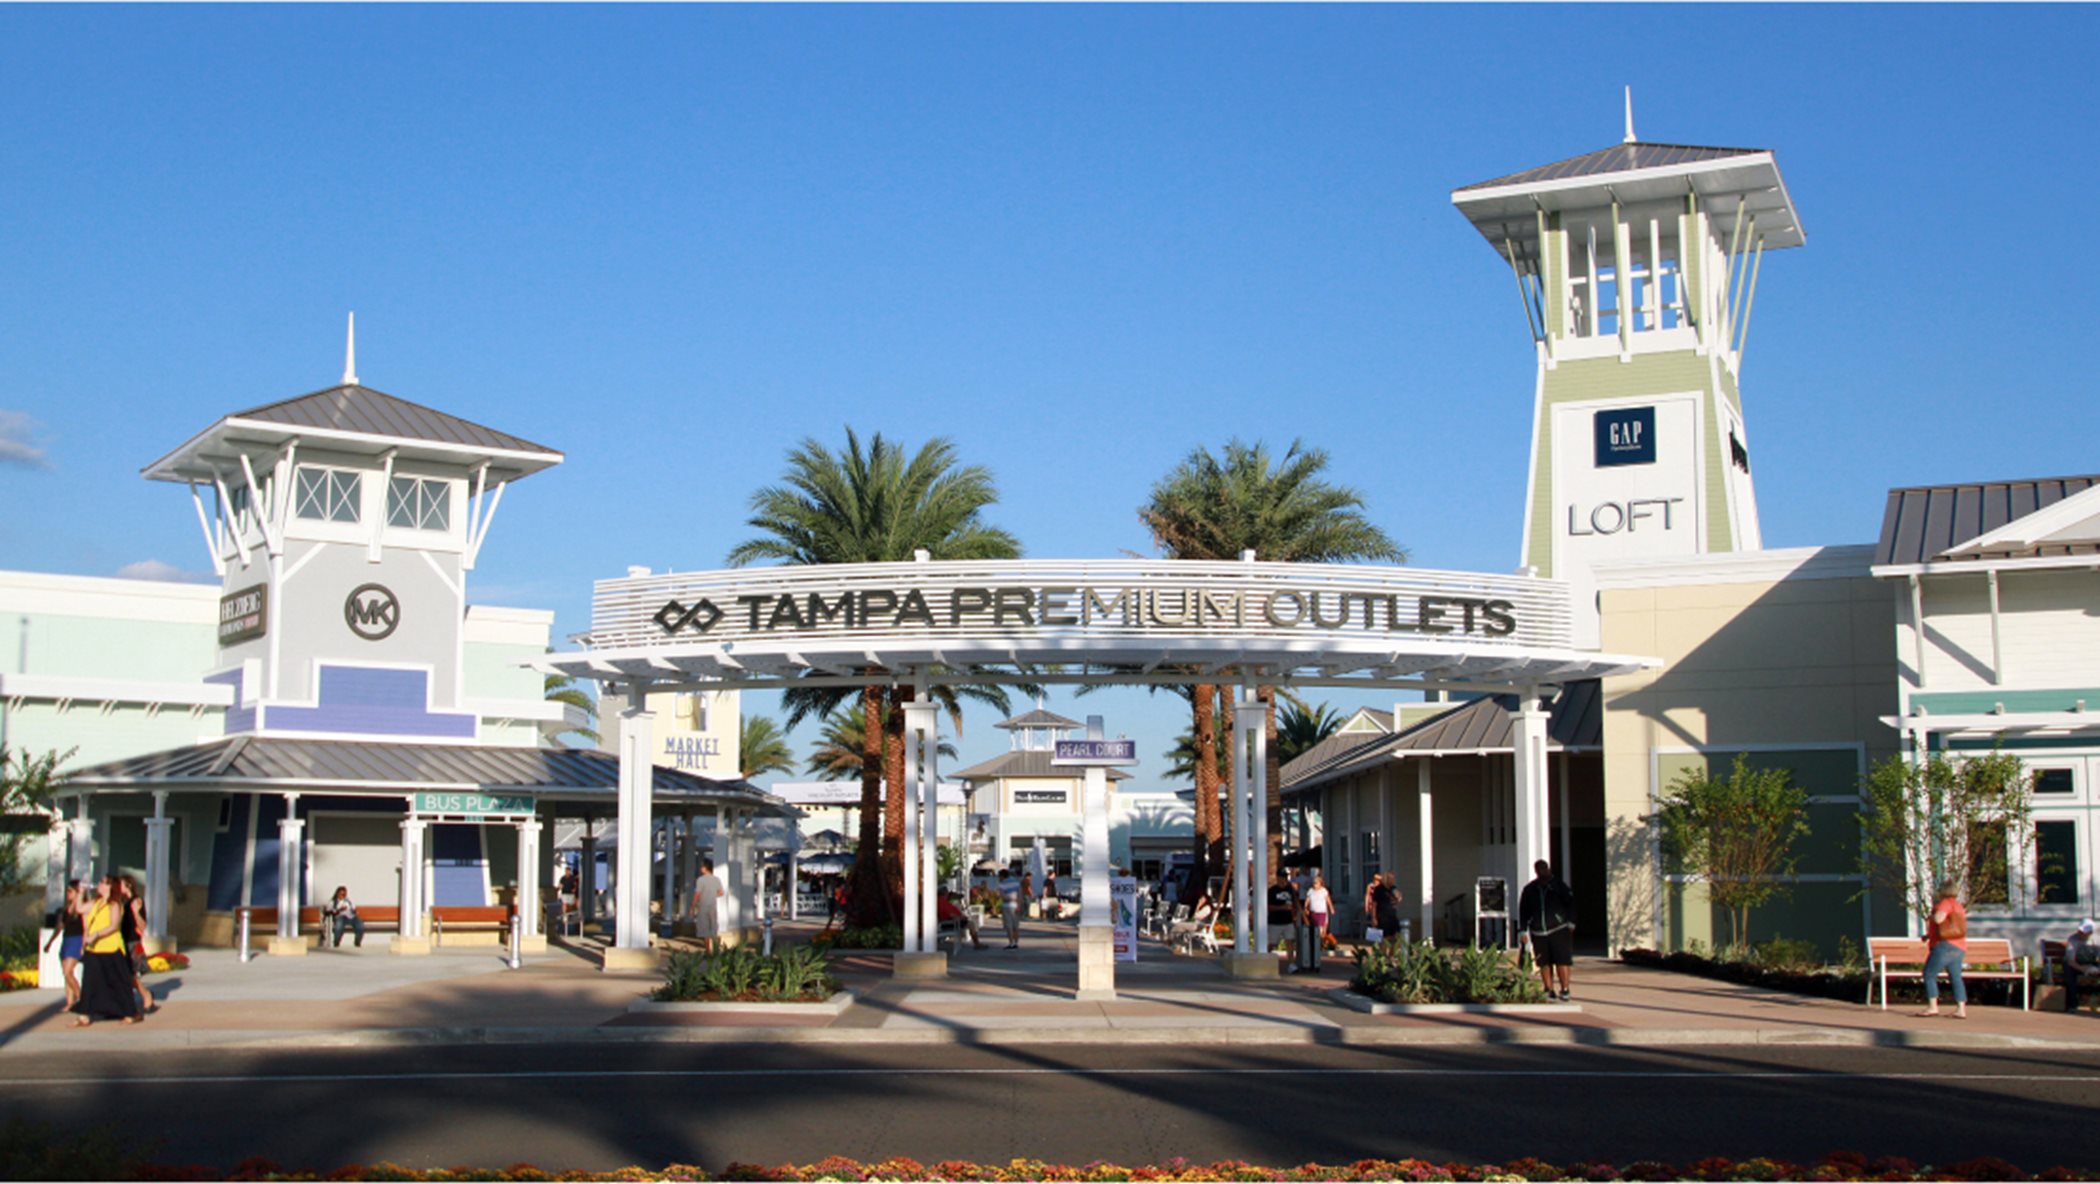  Tampa Premium Outlets